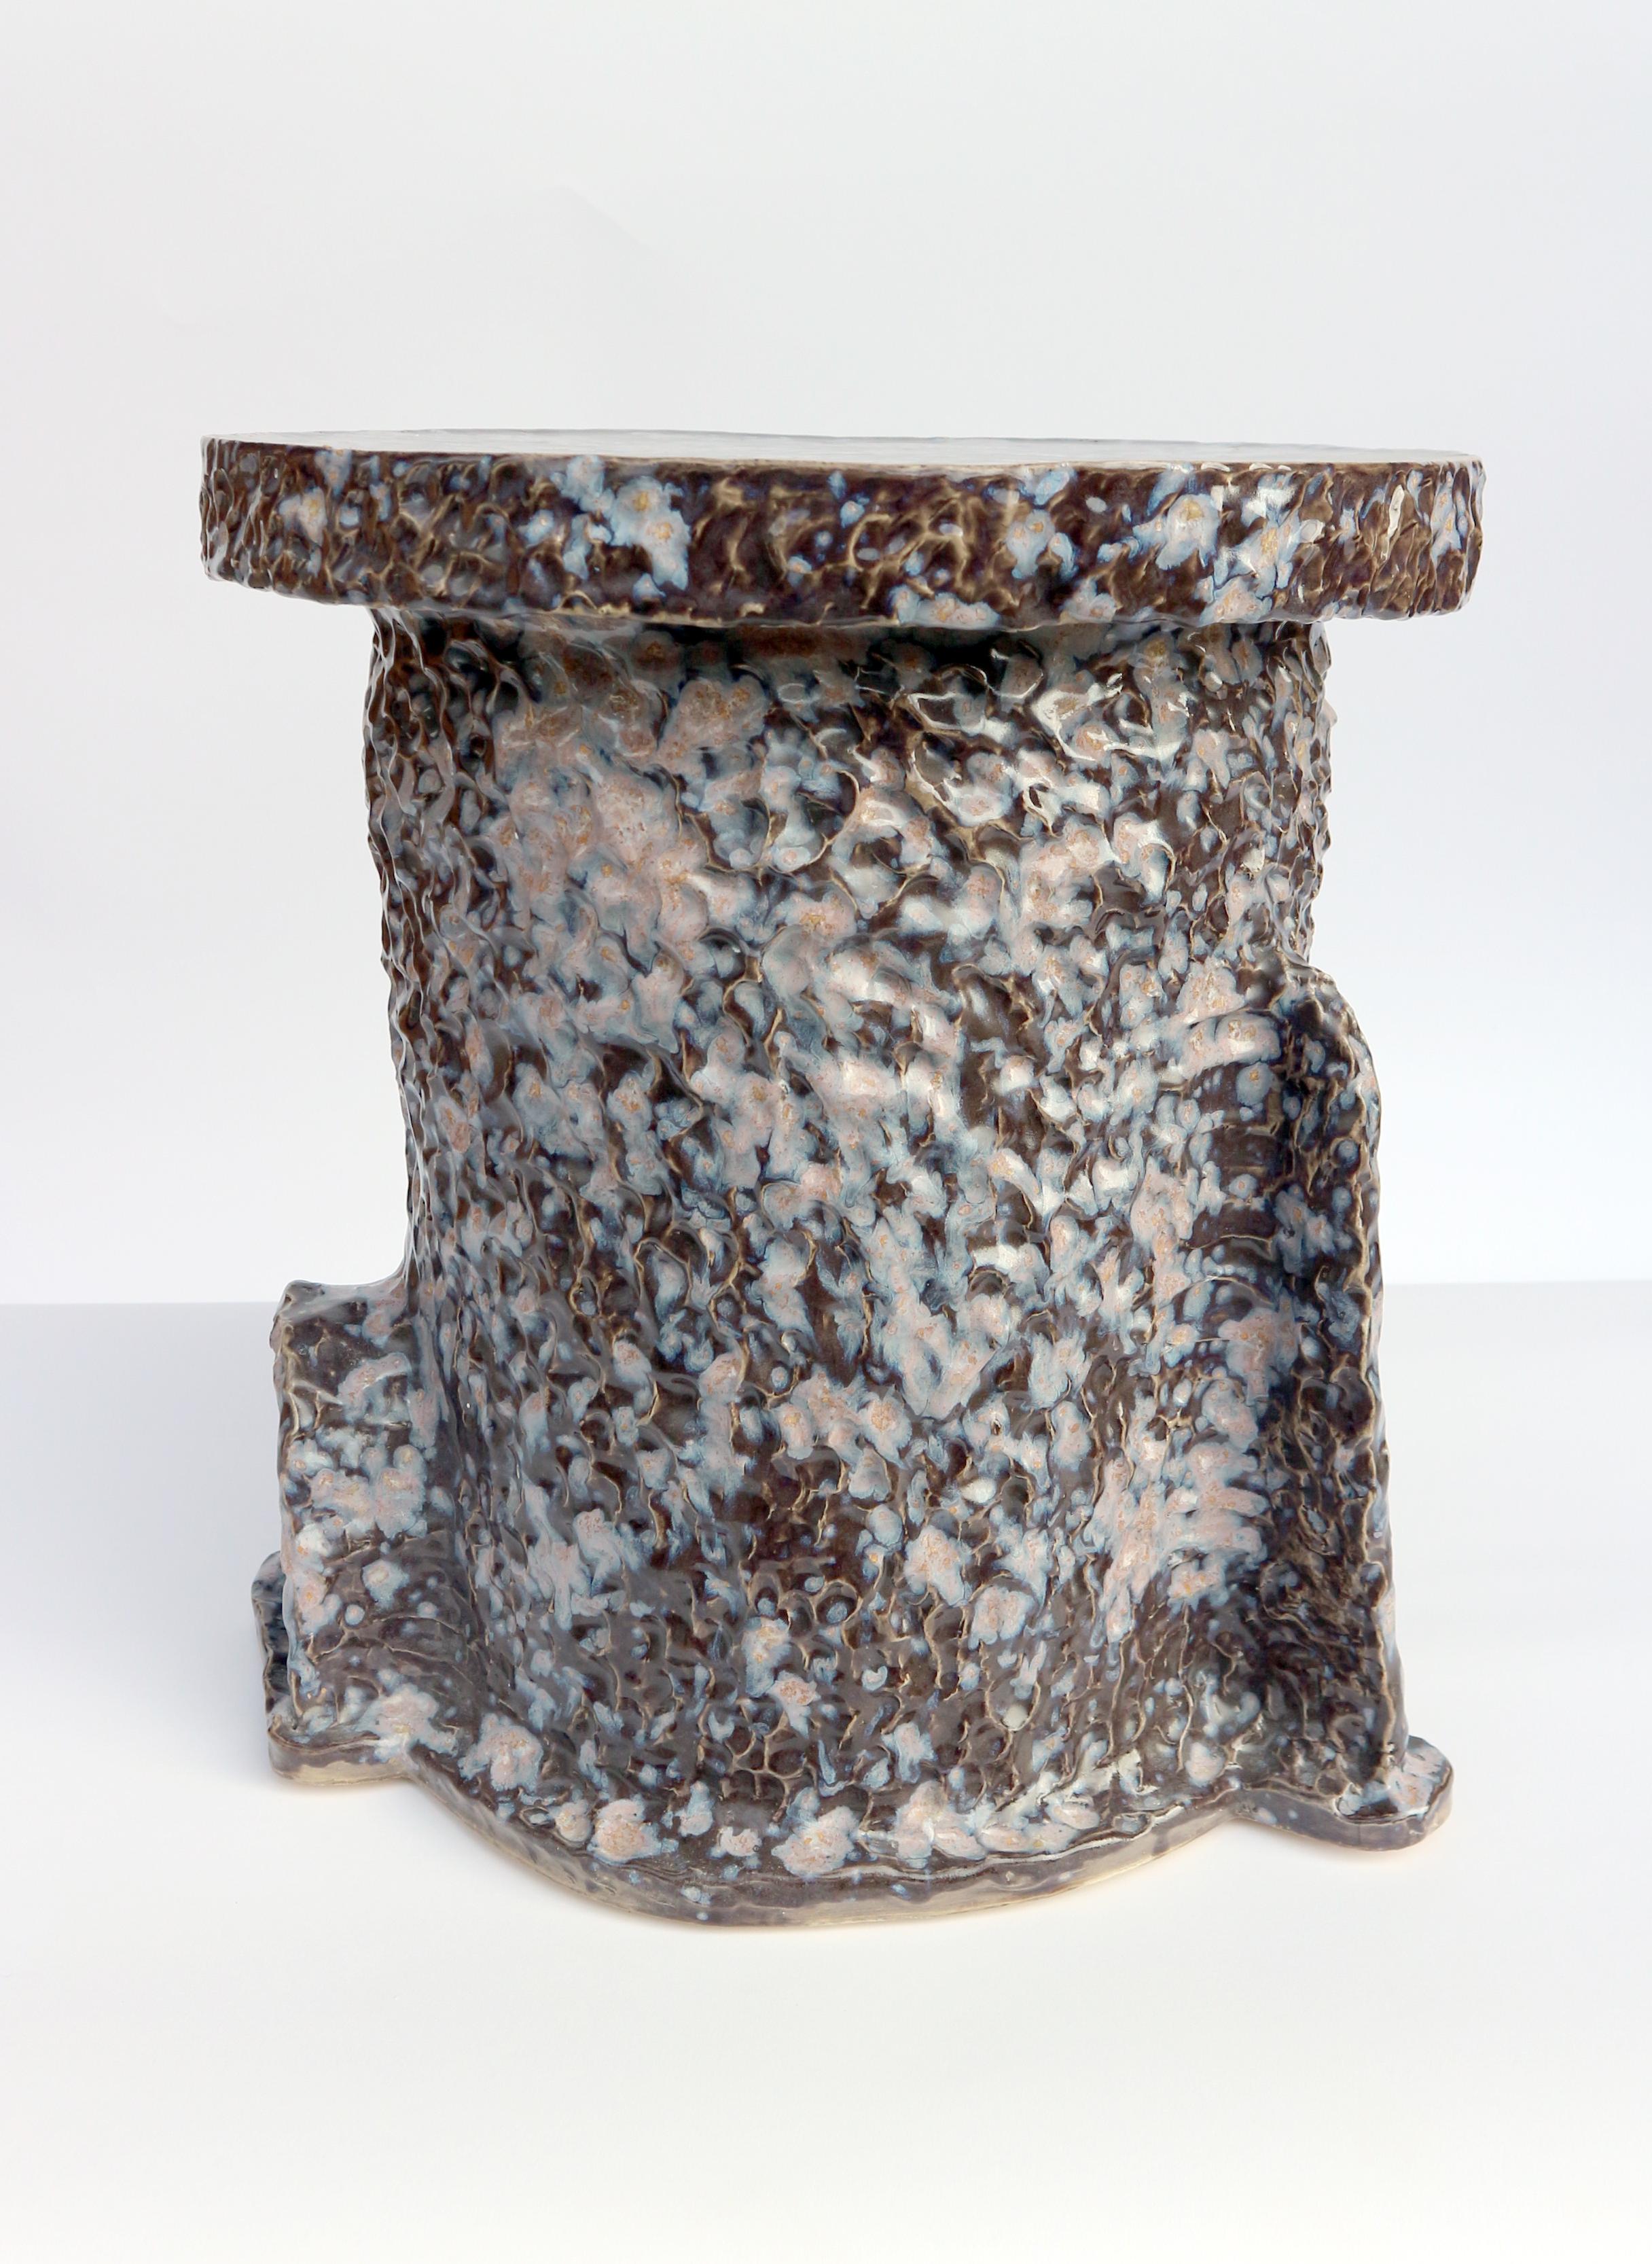 Contemporary hand-build glazed ceramic side table For Sale